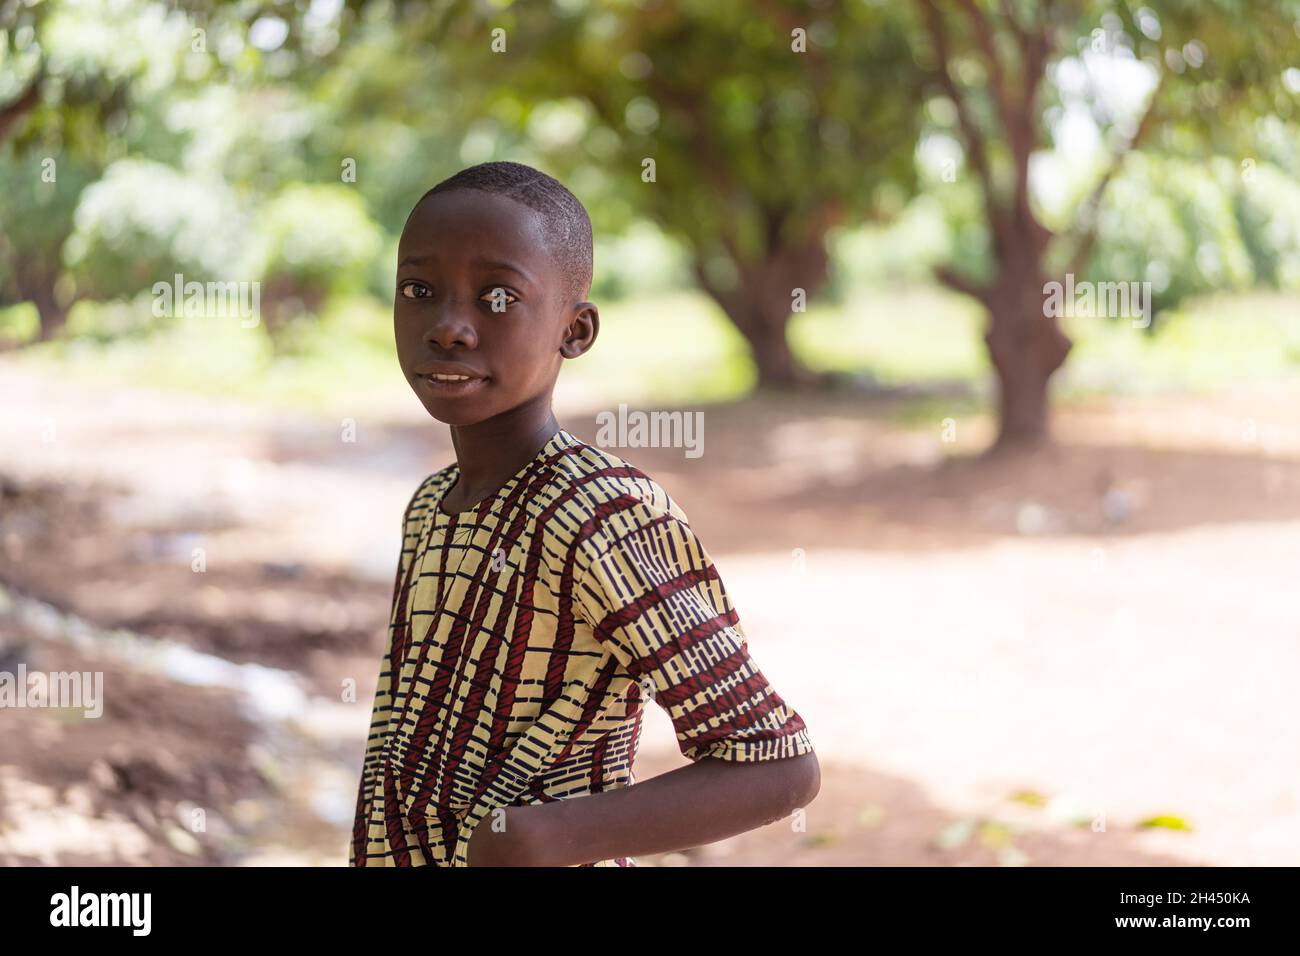 Lone black boy standing in a forest on the edge of an African village, looking thoughtfully into the camera Stock Photo